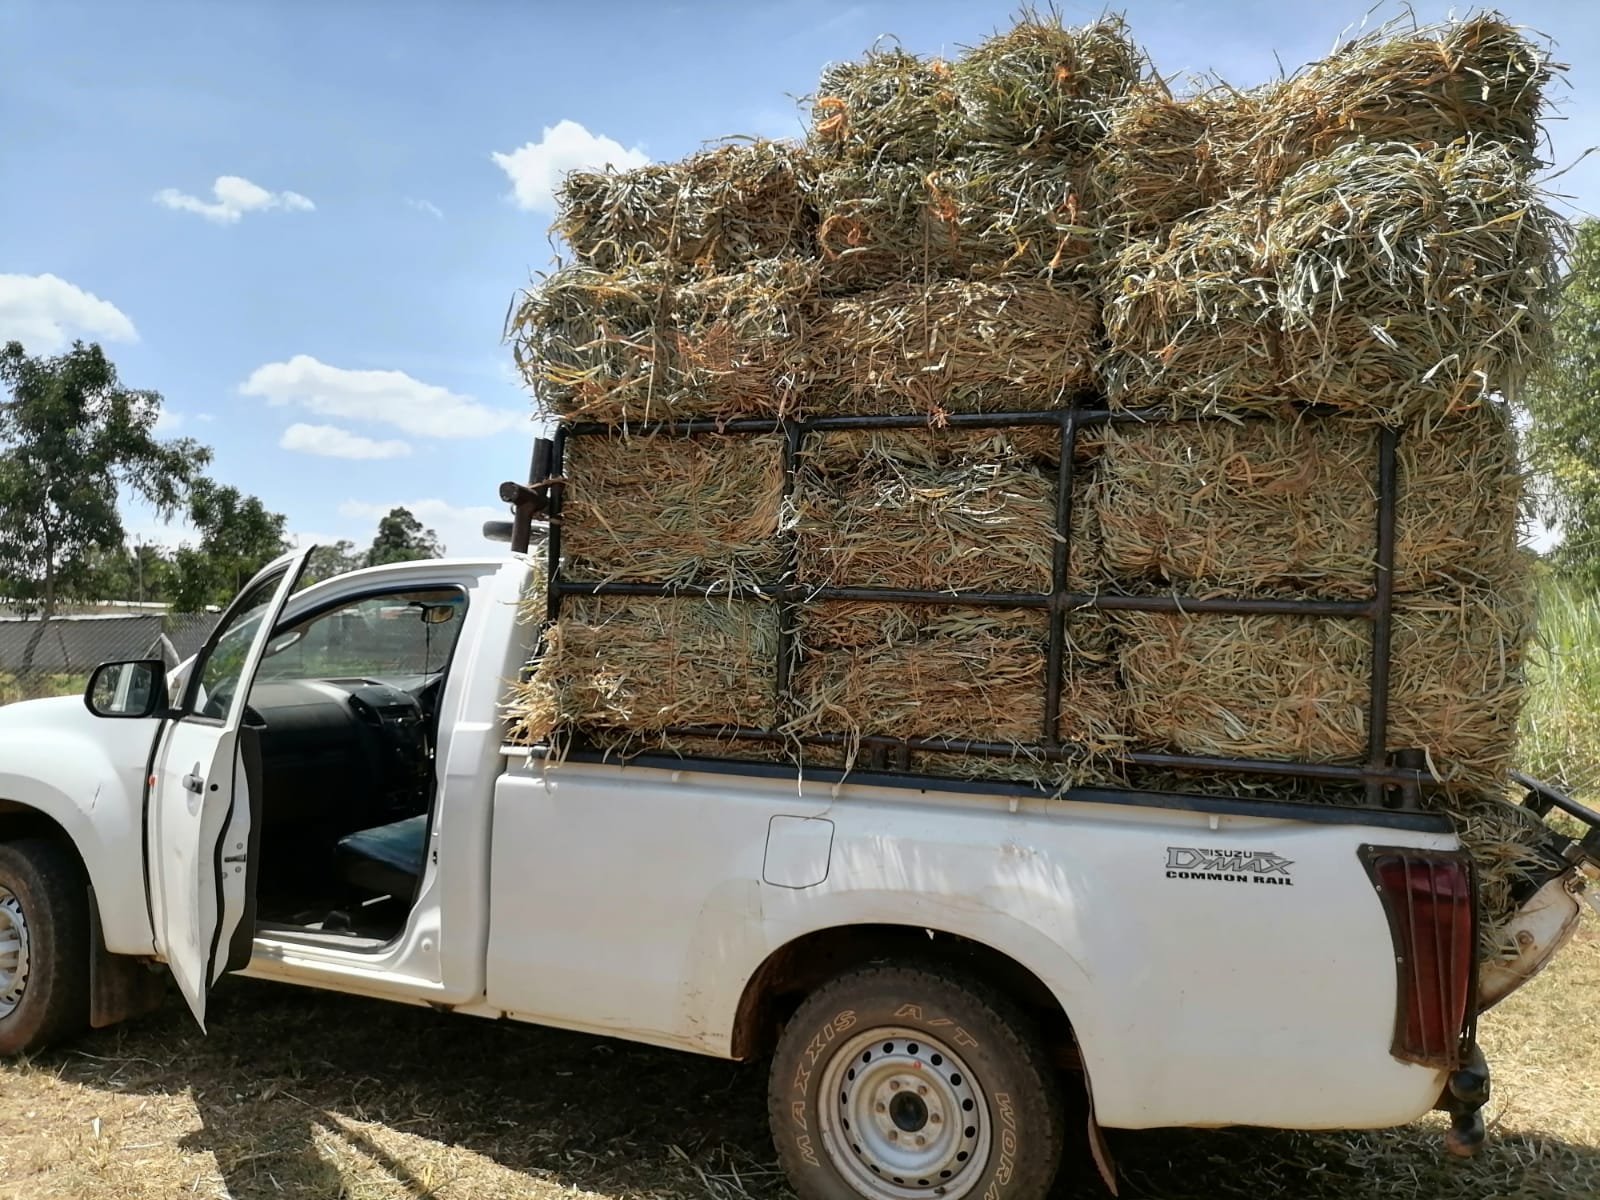 Truck loaded with Hay